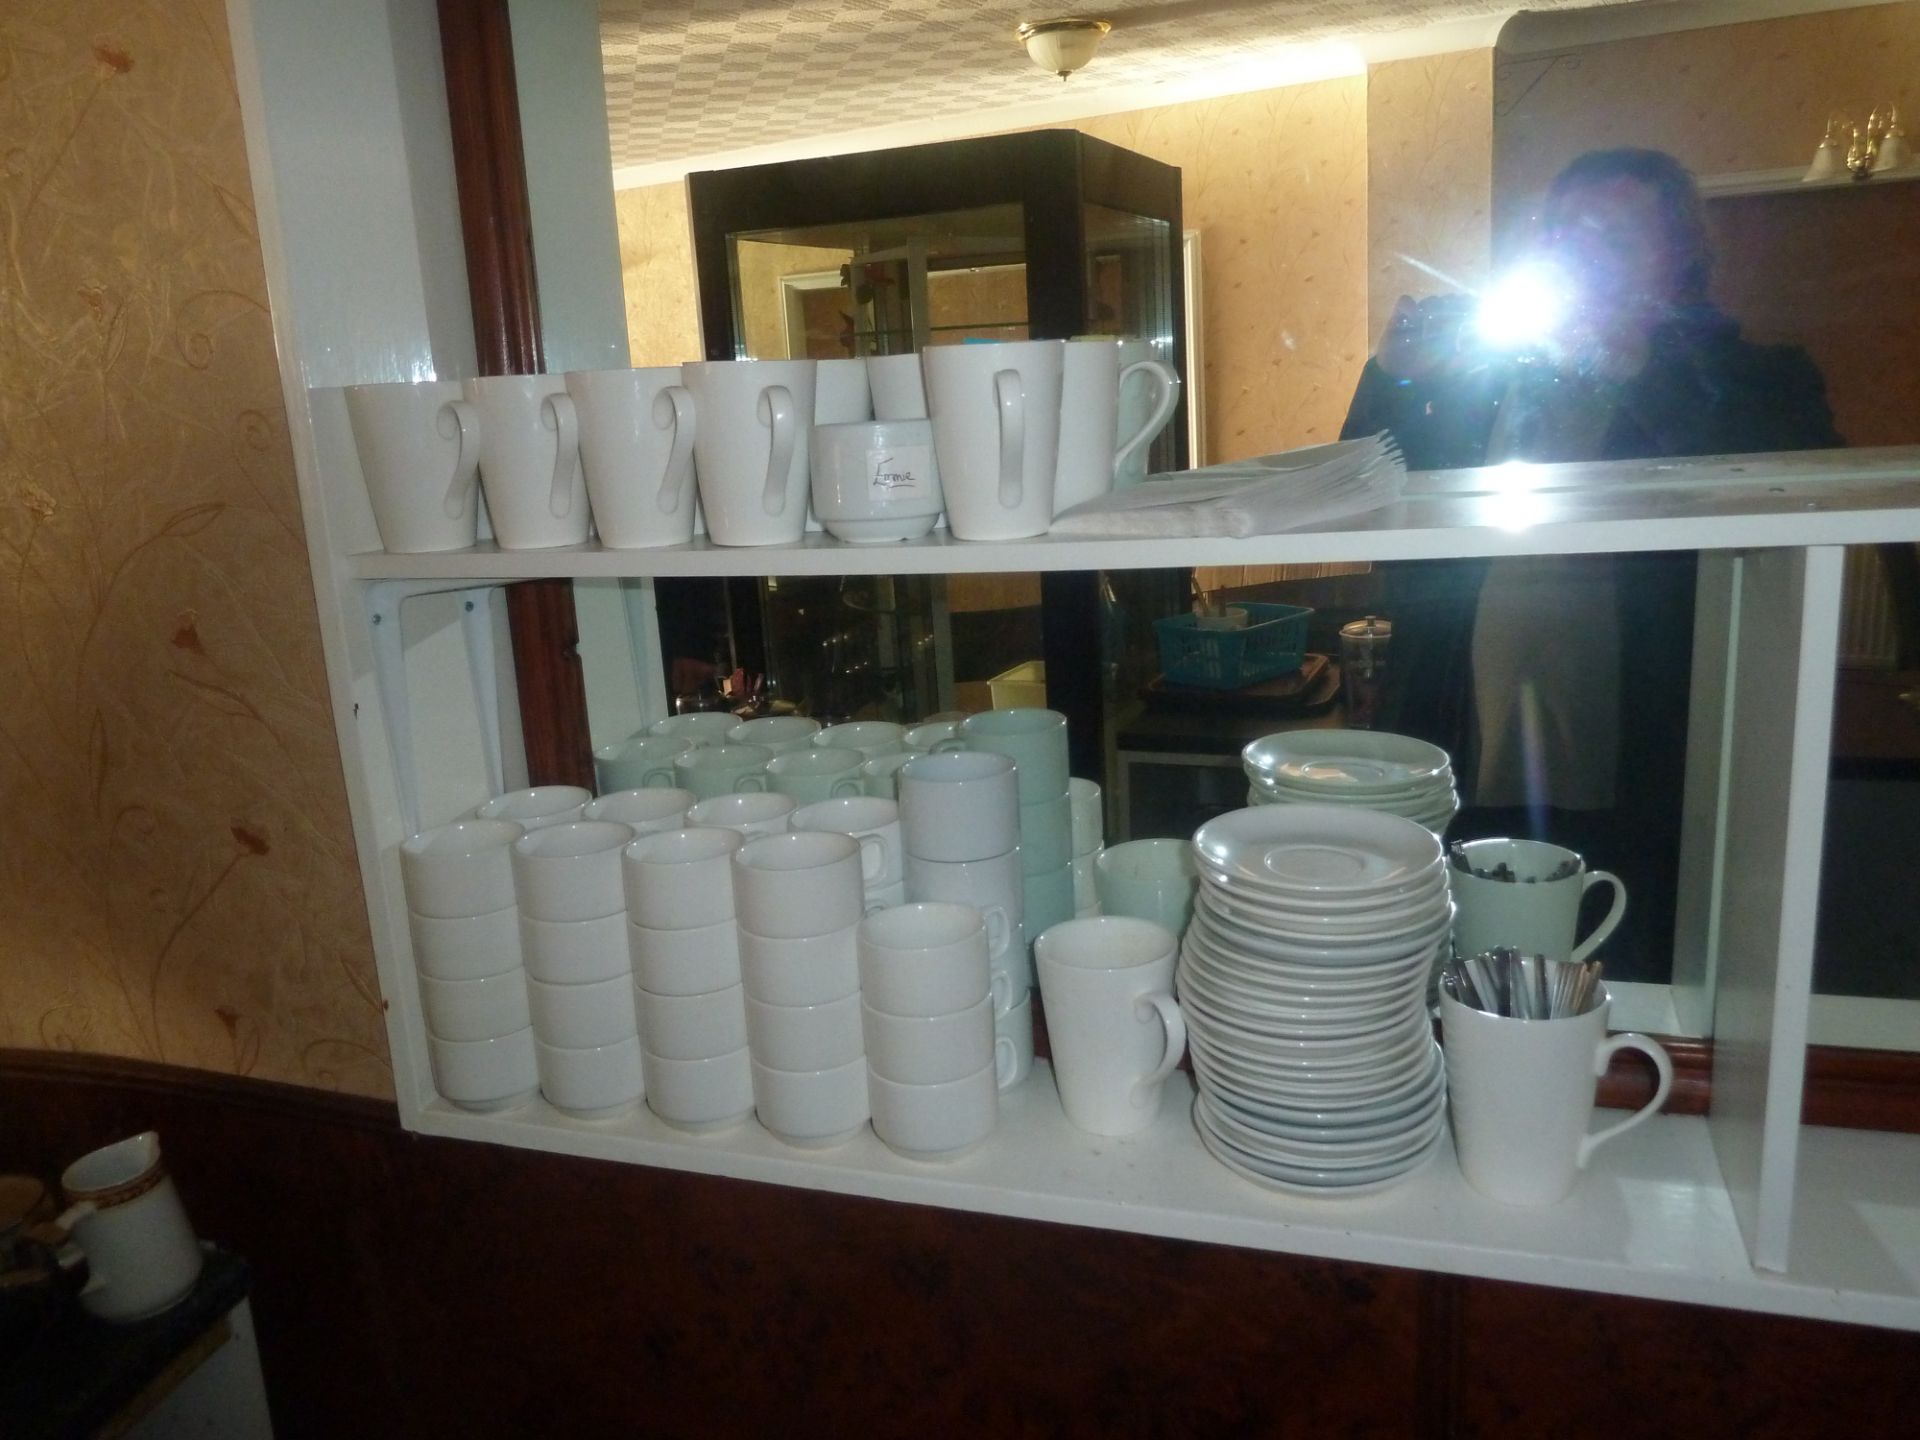 * Mixture of quality cups, saucers and mugs